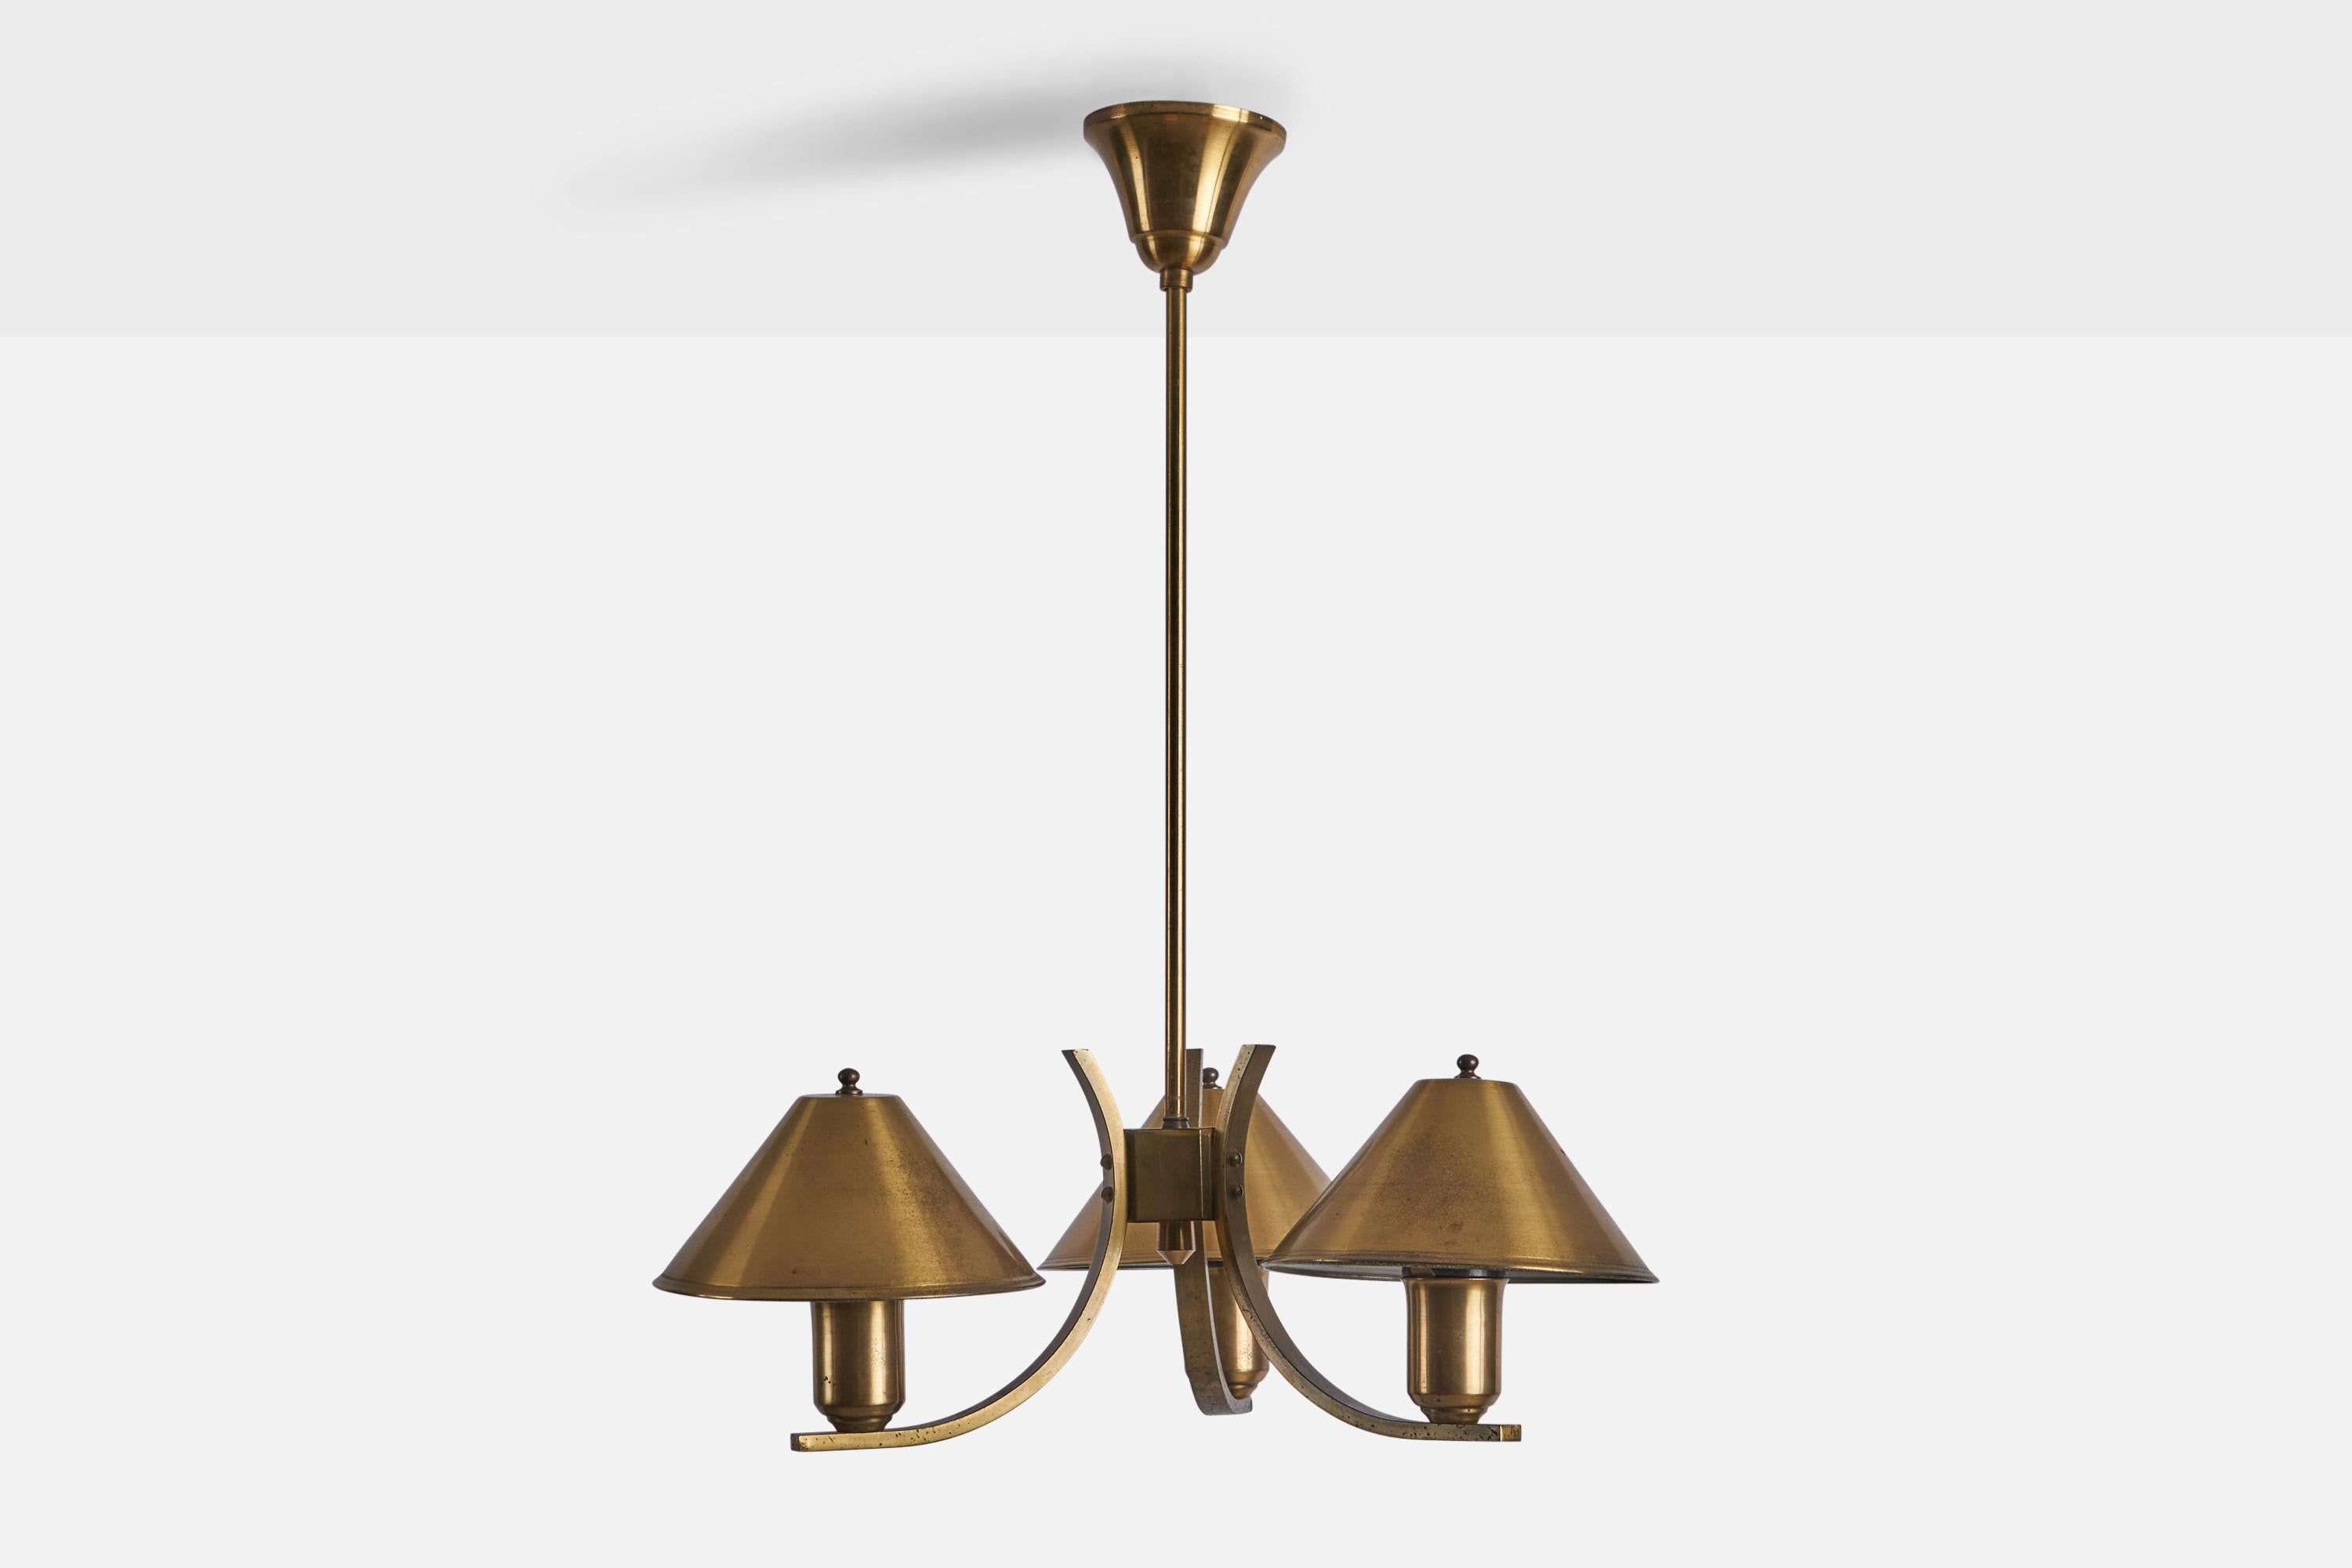 A three-armed brass chandelier designed and produced in Denmark, c. 1940s.

Overall Dimensions (inches): 23.5” H x 18” Diameter
Bulb Specifications: E-26 Bulb
Number of Sockets: 3